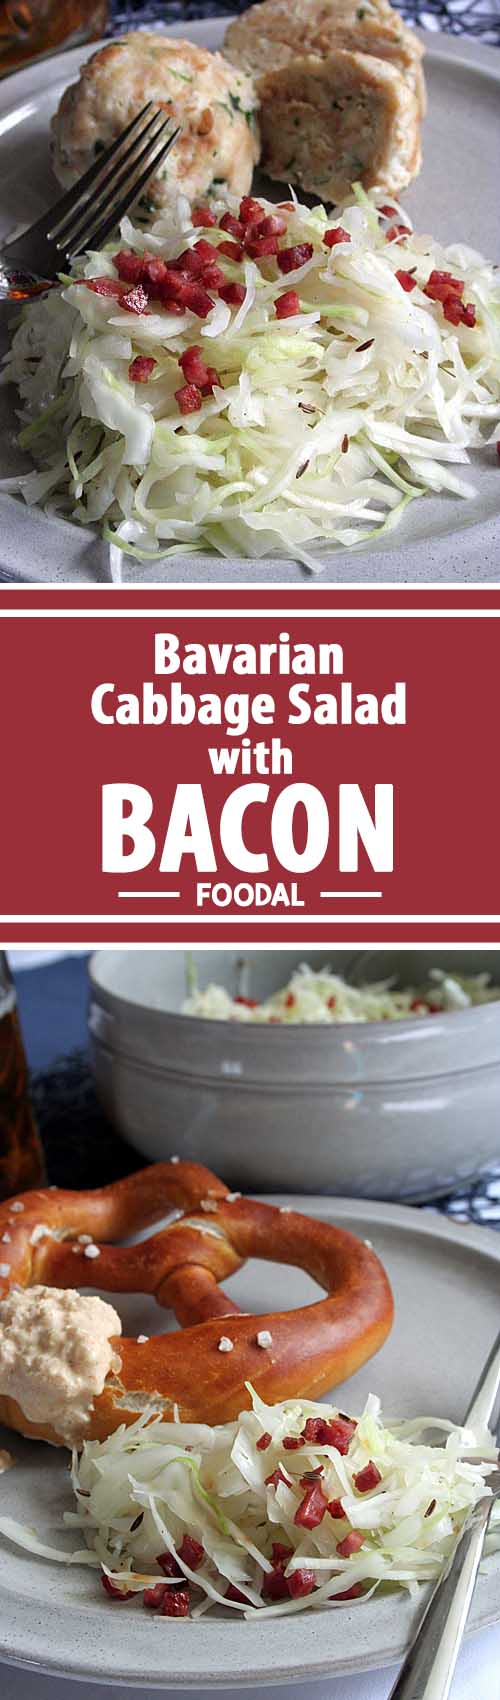 Try this delicious German version of coleslaw with a vinegar dressing. Topped with crispy bacon, it will soon become one of your favorites! Serve it for Oktoberfest or have it any time that you are hankering for a true Bavarian taste. https://foodal.com/recipes/german-recipes/cabbage-salad-bacon/